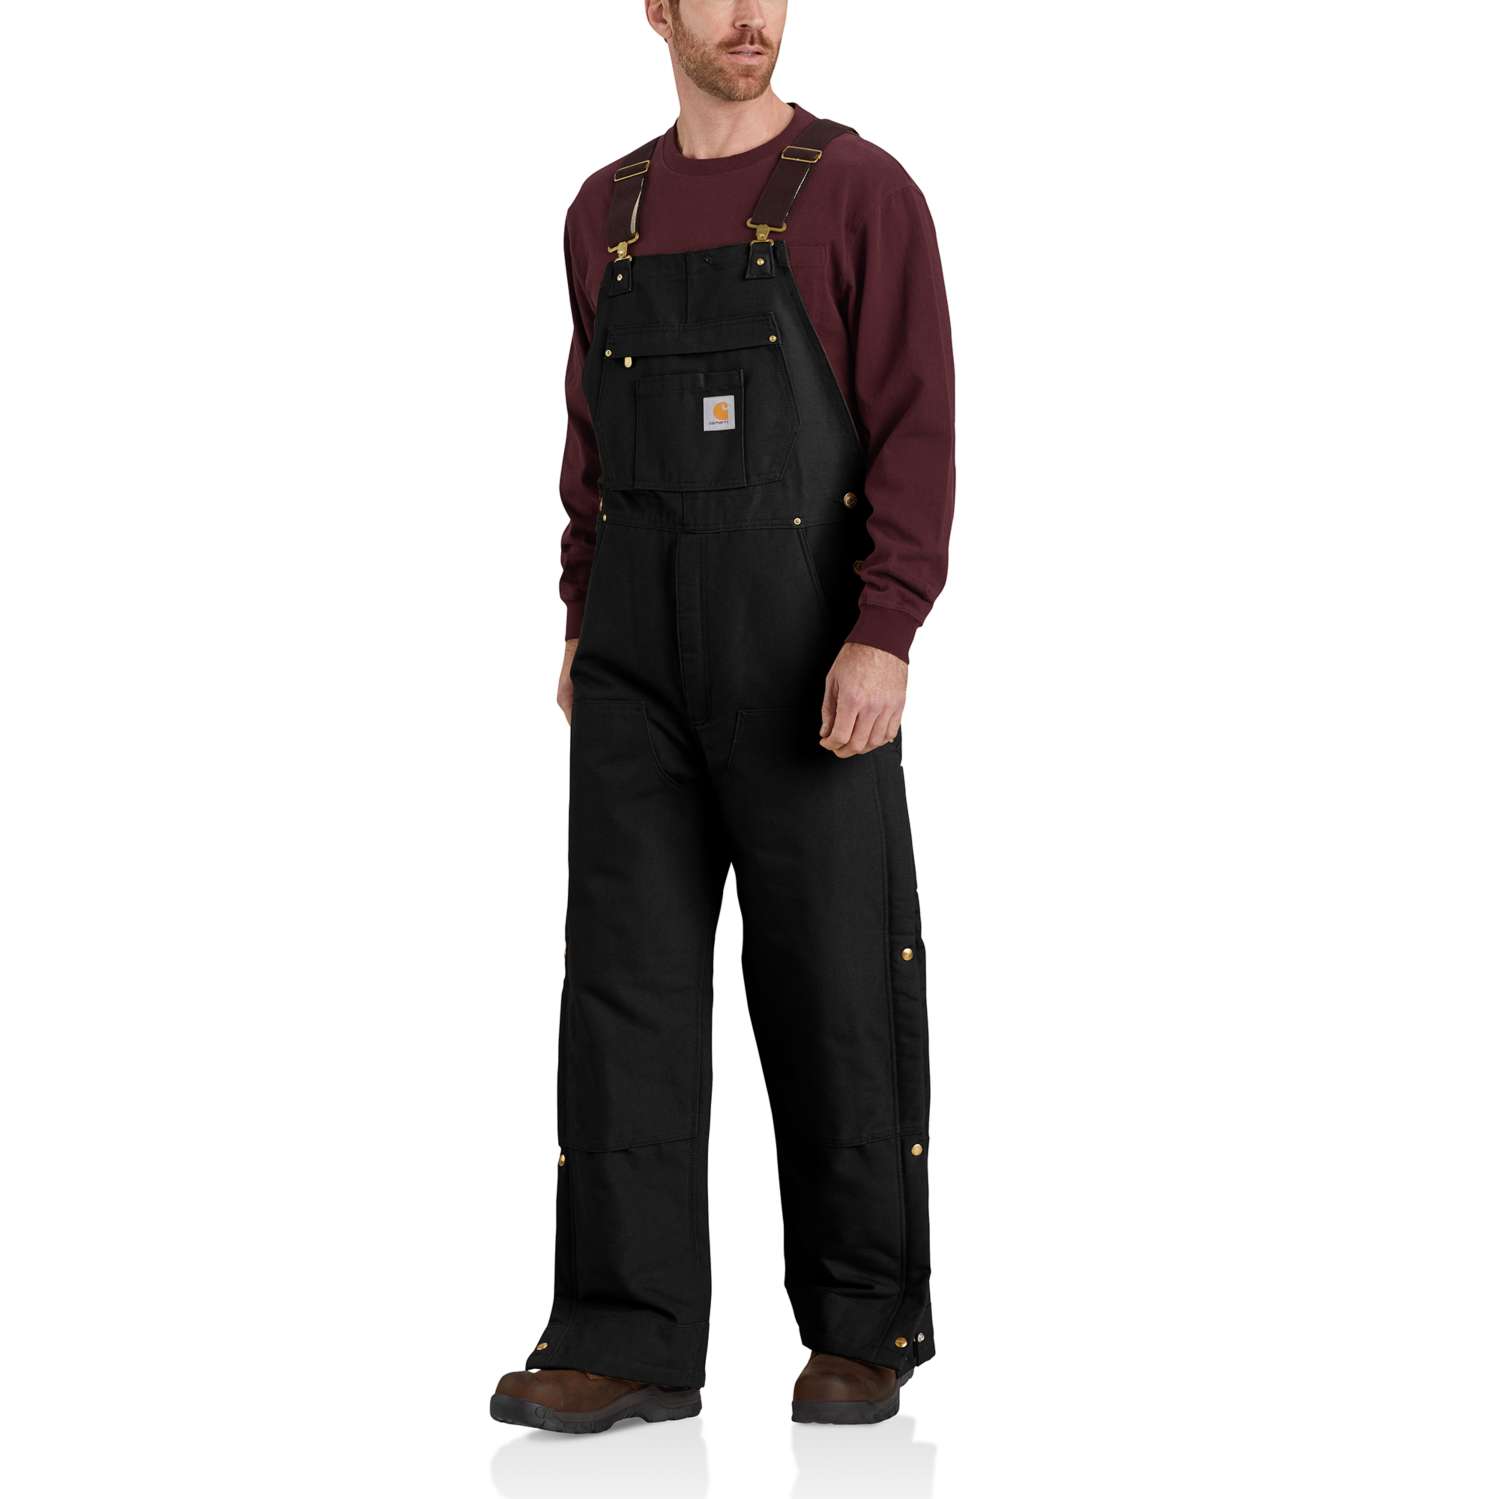 FIRM_DUCK_INSULATED_BIB_OVERALL_PLh0yBc1sn